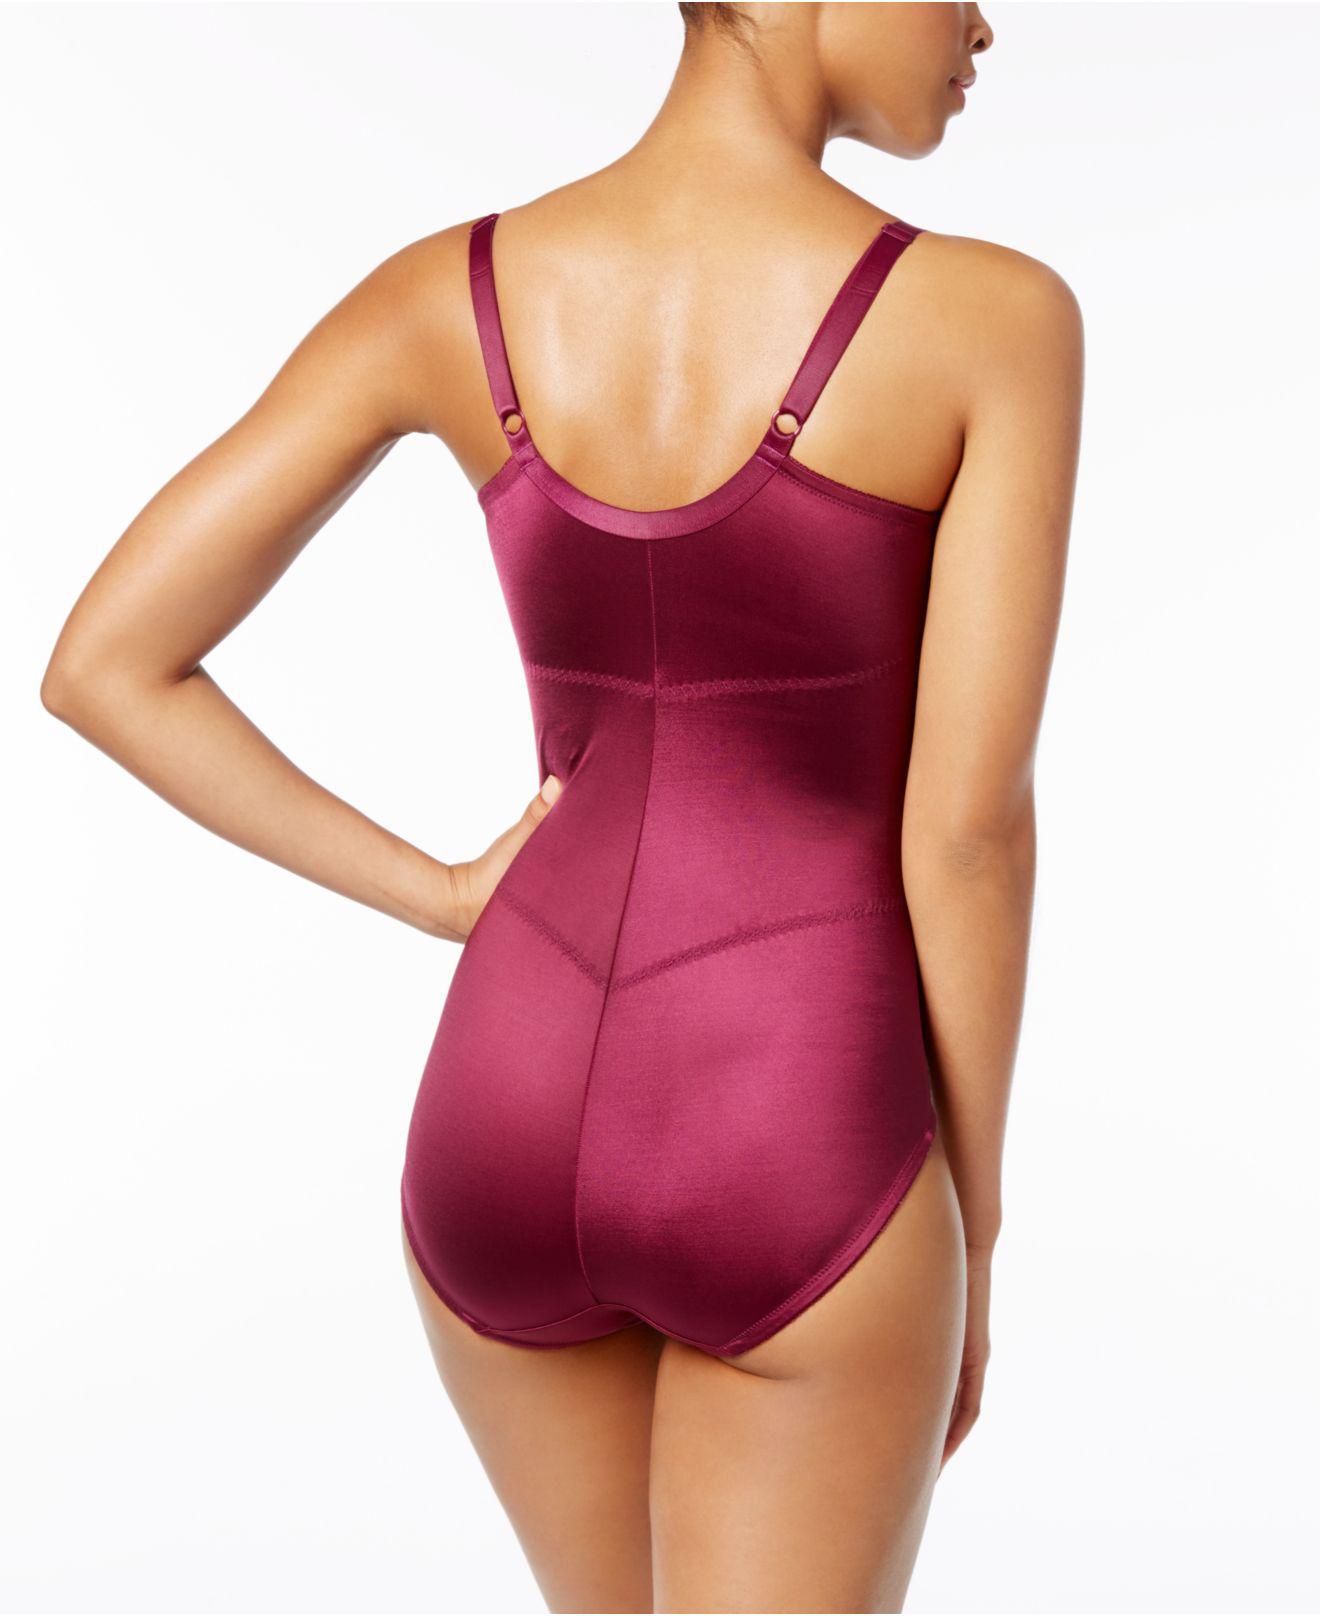 Maidenform Wear-Your-Own-Bra Body Shaper,Firm Control Shapewear,Open-Bust  Shaper Size M - $10 (85% Off Retail) New With Tags - From jello